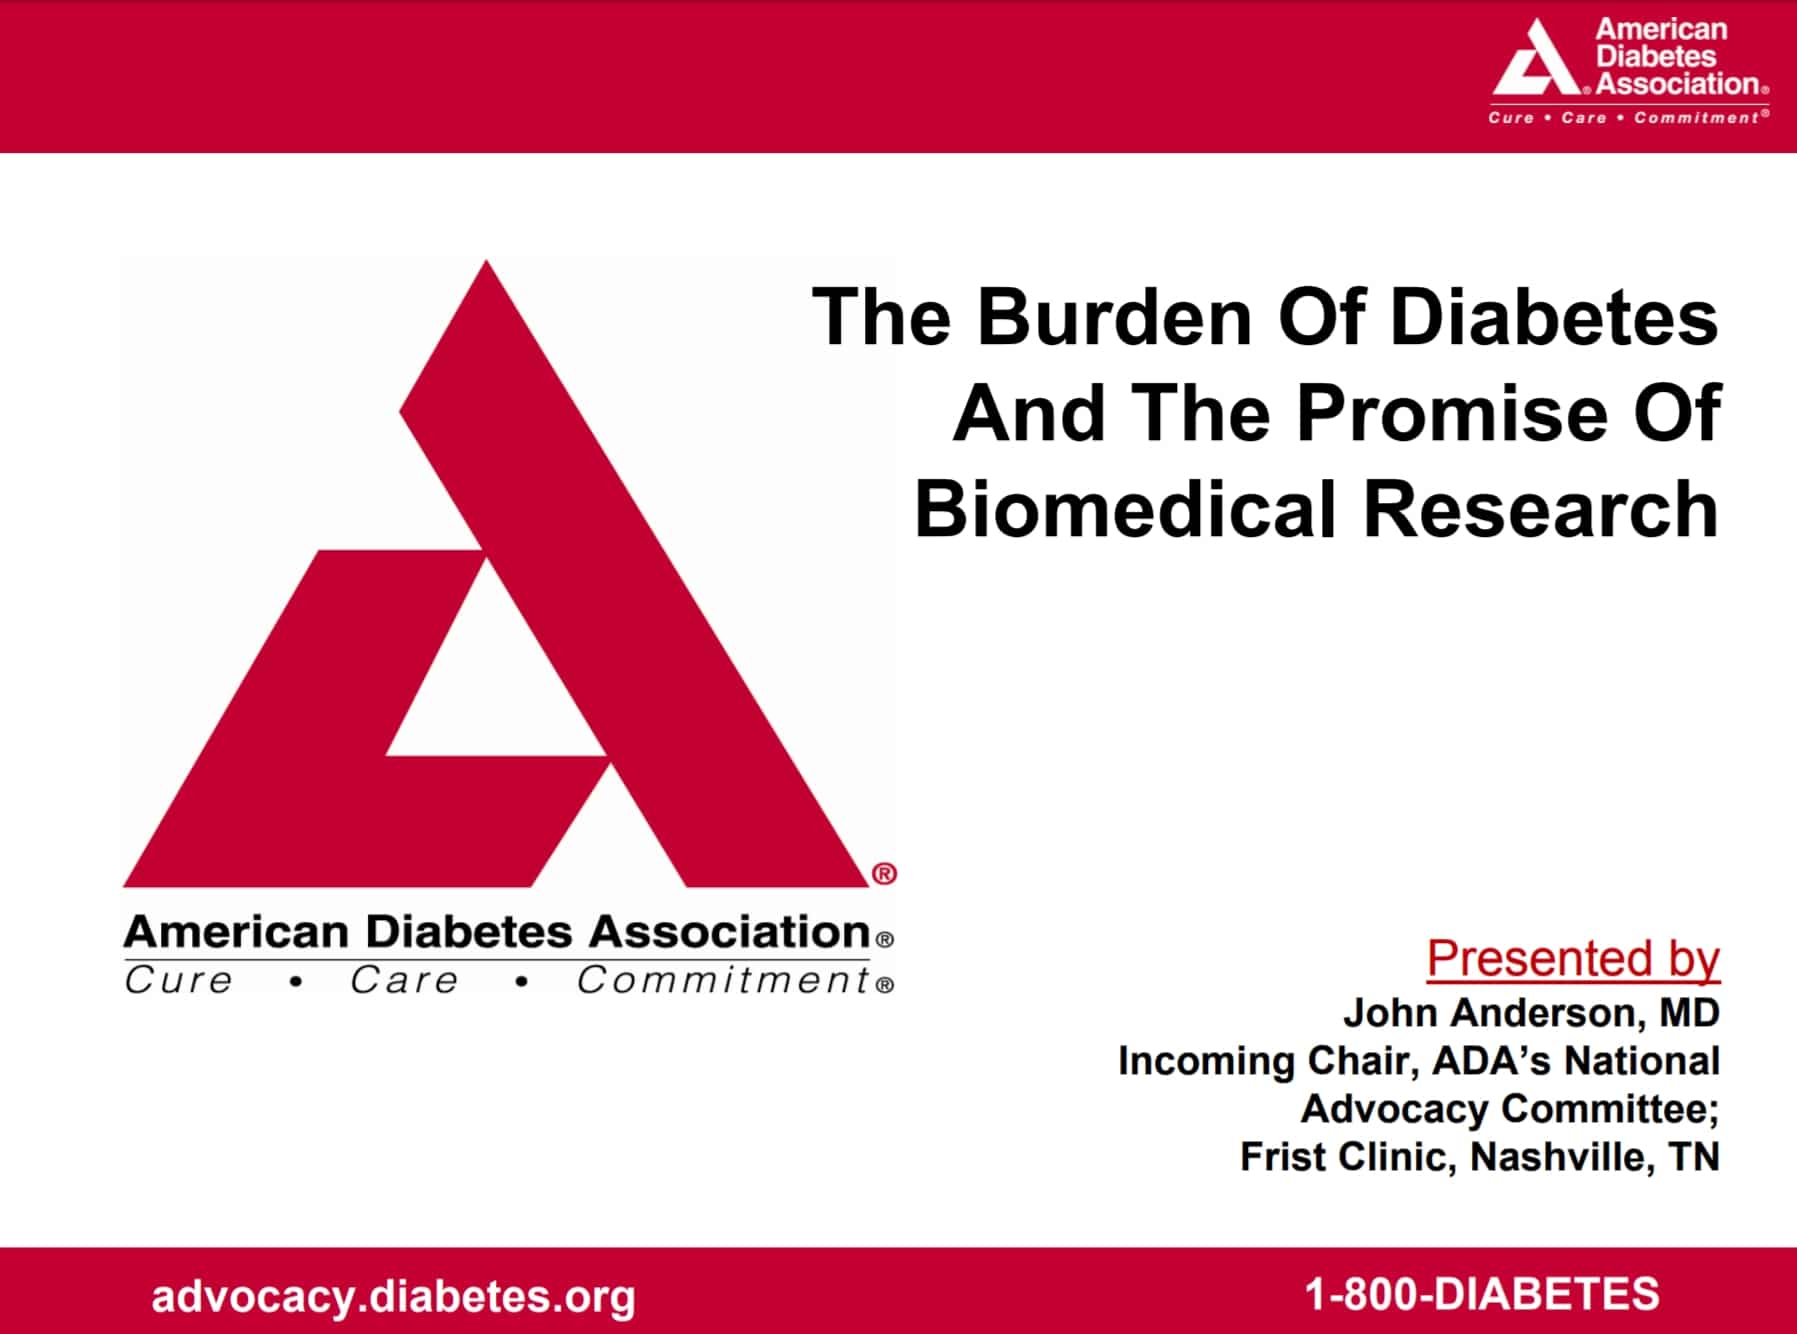 "Burden of Diabetes and the Promise of Biomedical Research" presentation cover.